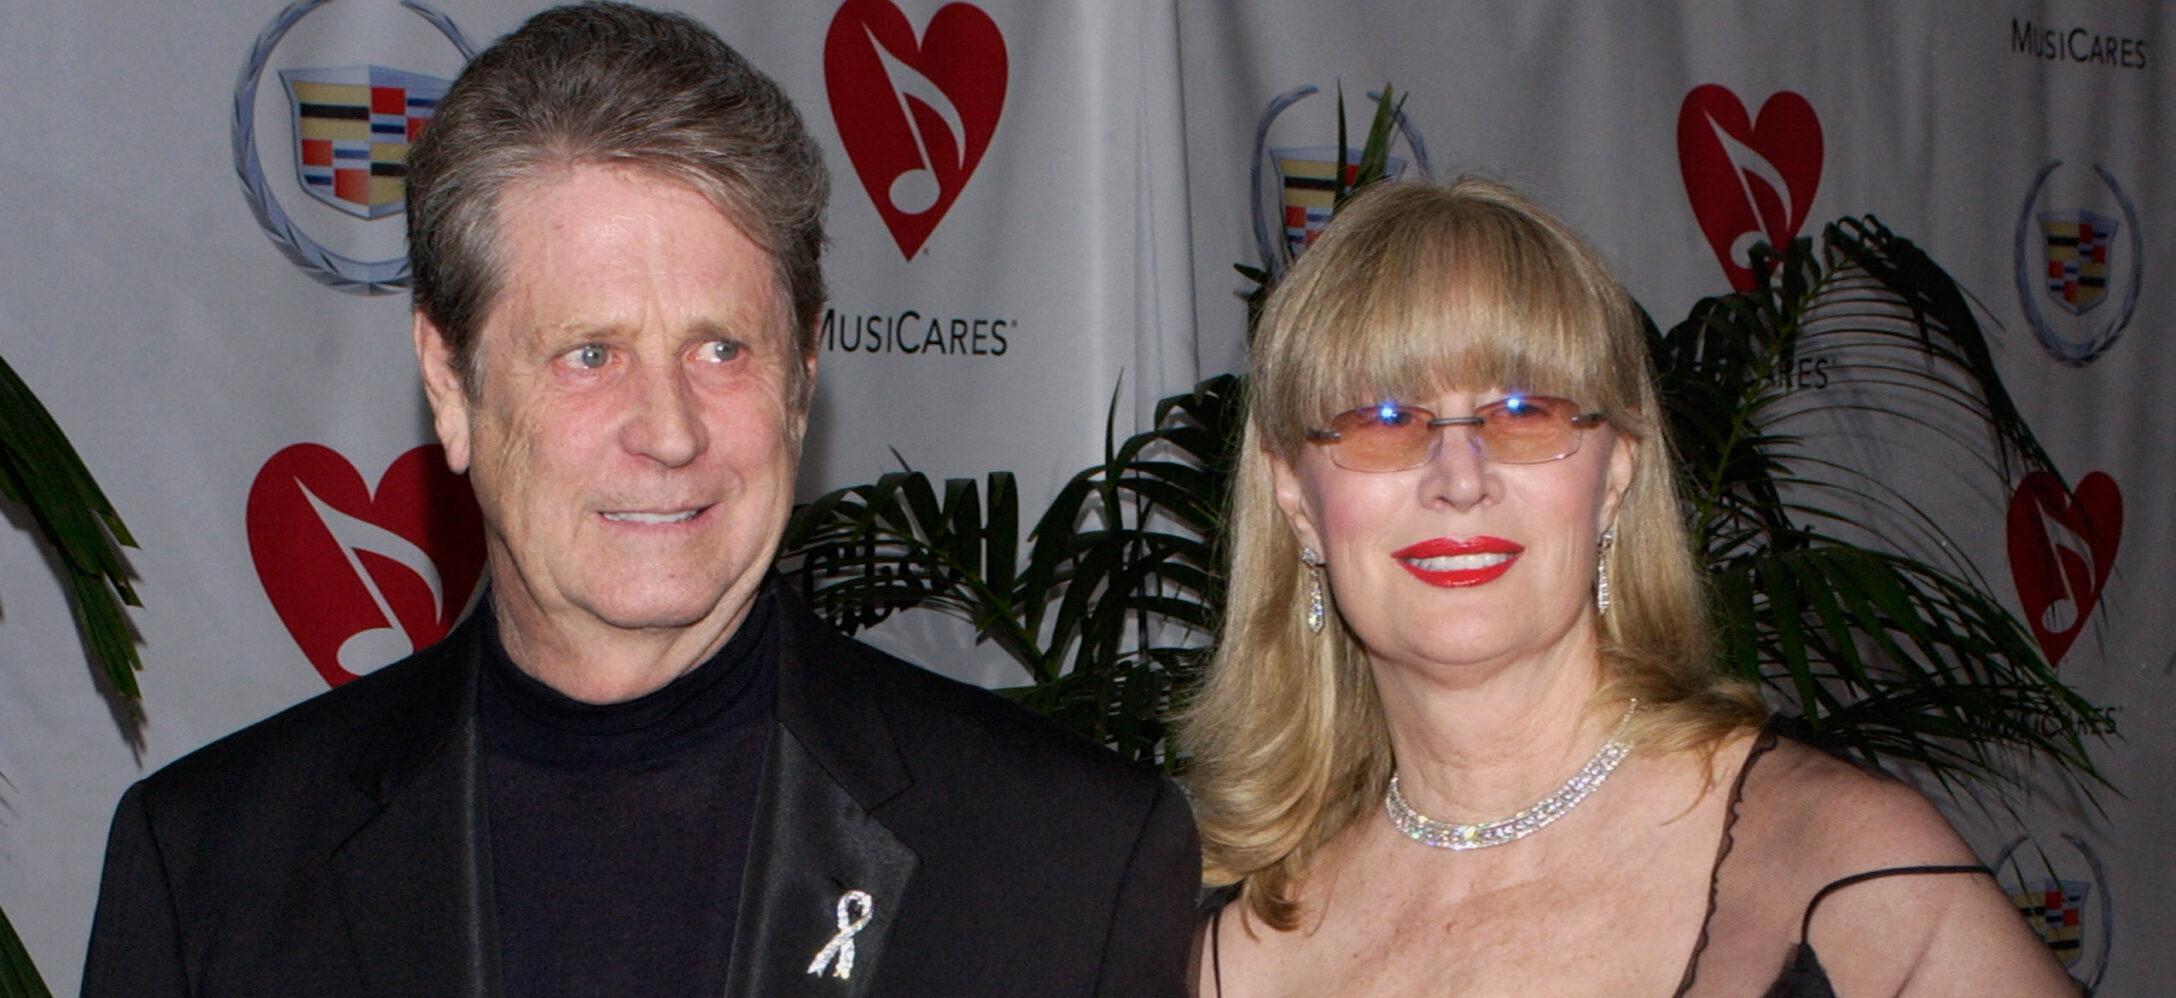 Brian Wilson and Melinda Kae Ledbetter arrive for the Musicares 2005 Person of the Year Tribute dinner honoring Wilson at the Paladium in the Hollywood section of Los Angeles, California February 11, 2005.